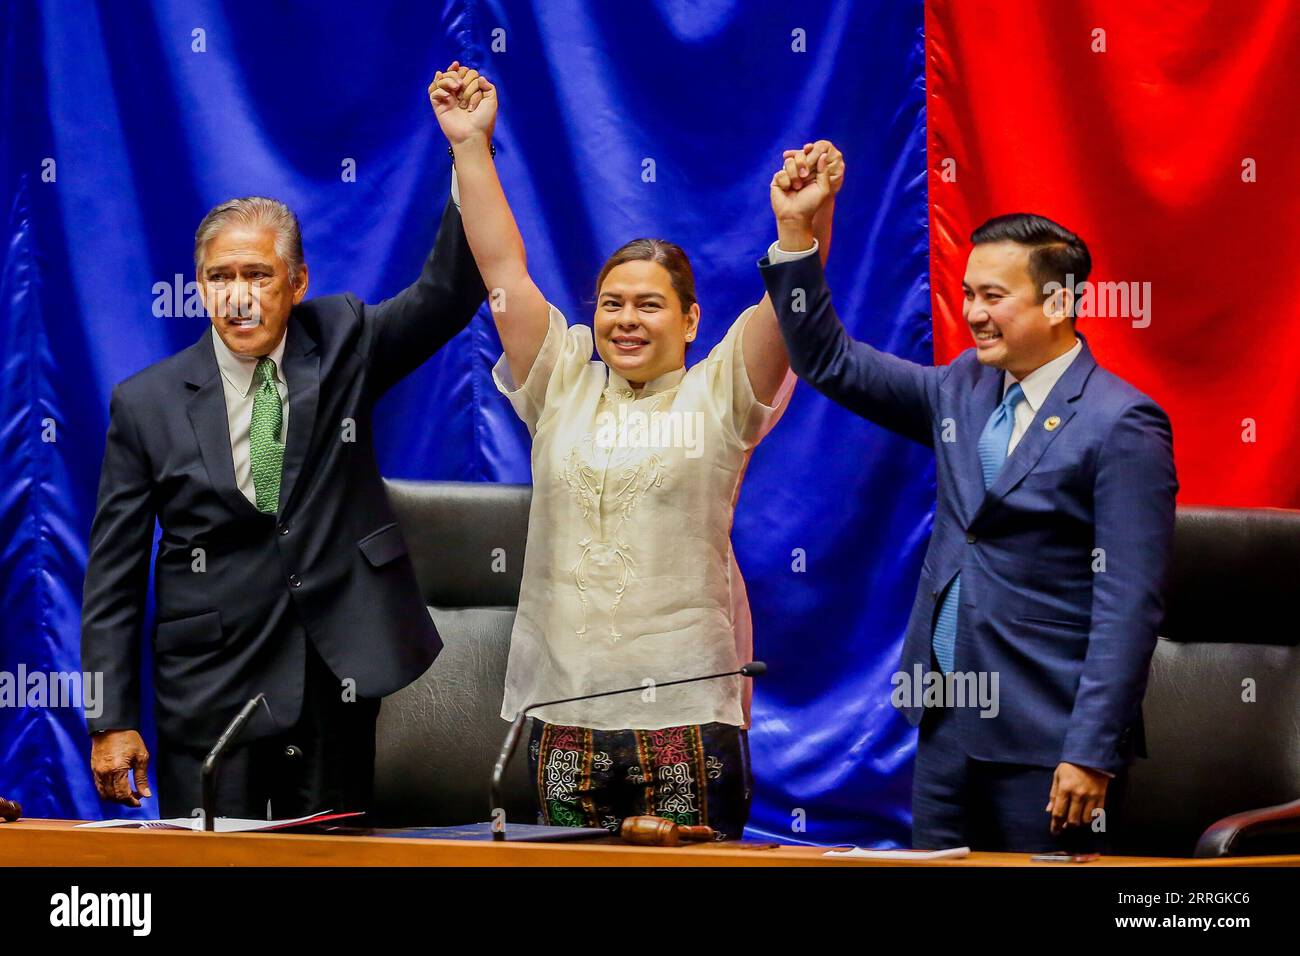 Philippinen, Proklamation des neuen Präsidenten Ferdinand Romualdez Marcos in Quezon-Stadt 220525 -- QUEZON CITY, May 25, 2022 -- Vice President-elect Sara Duterte-Carpio C raises hands with the Senate president Vicente Sotto L and the House speaker Allan Velasco during her proclamation at the Philippine House of Representatives in Quezon City, the Philippines, on May 25, 2022. The Philippine Congress on Wednesday proclaimed Ferdinand Romualdez Marcos as the winner of the presidential election, succeeding Rodrigo Duterte, who will step down in June after six years in office. The joint session Stock Photo